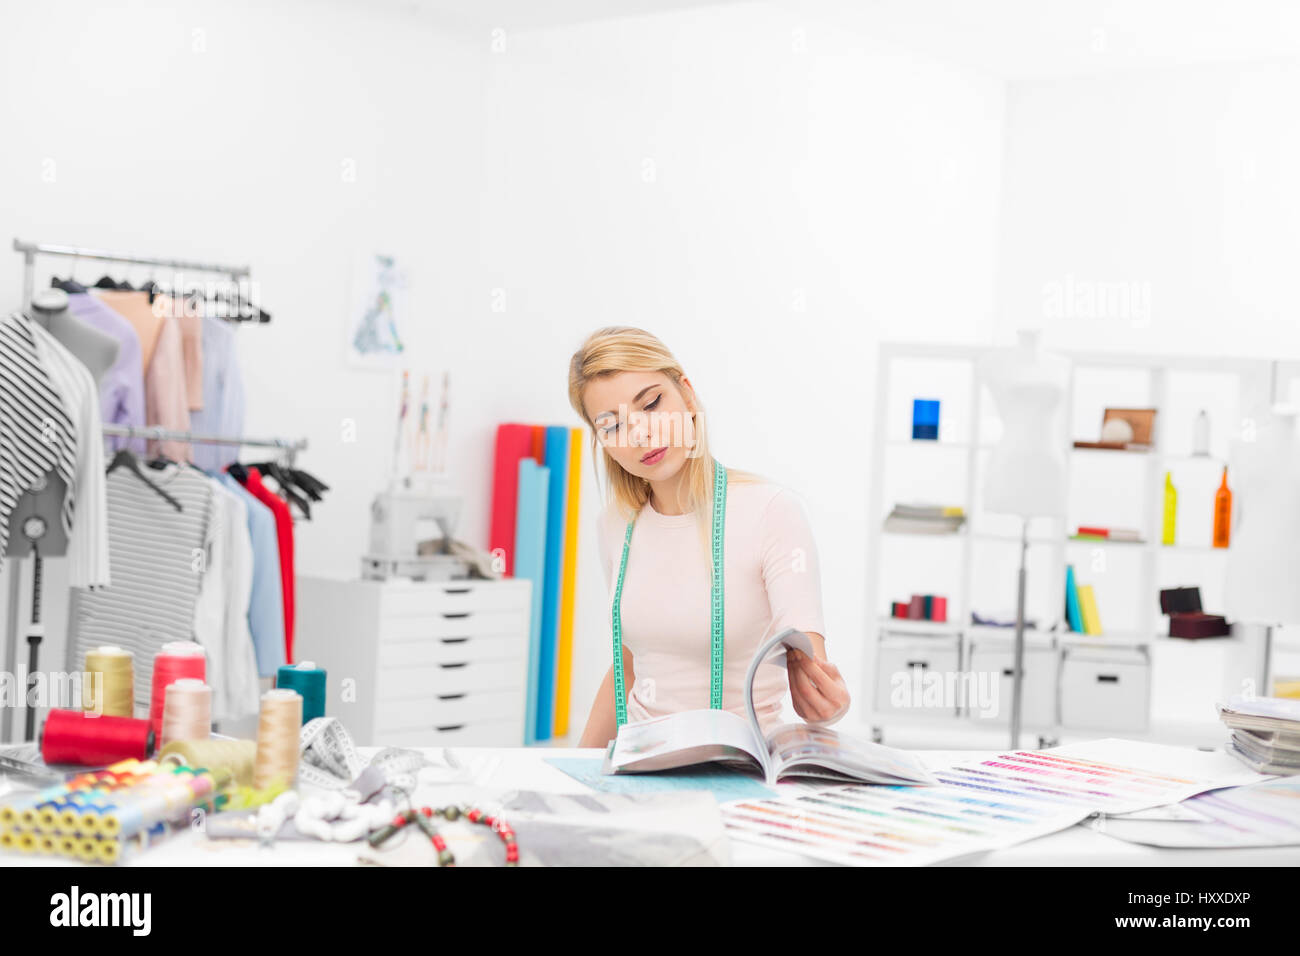 young fashion designer sitting at the desk in her workshop looking throught magazines Stock Photo